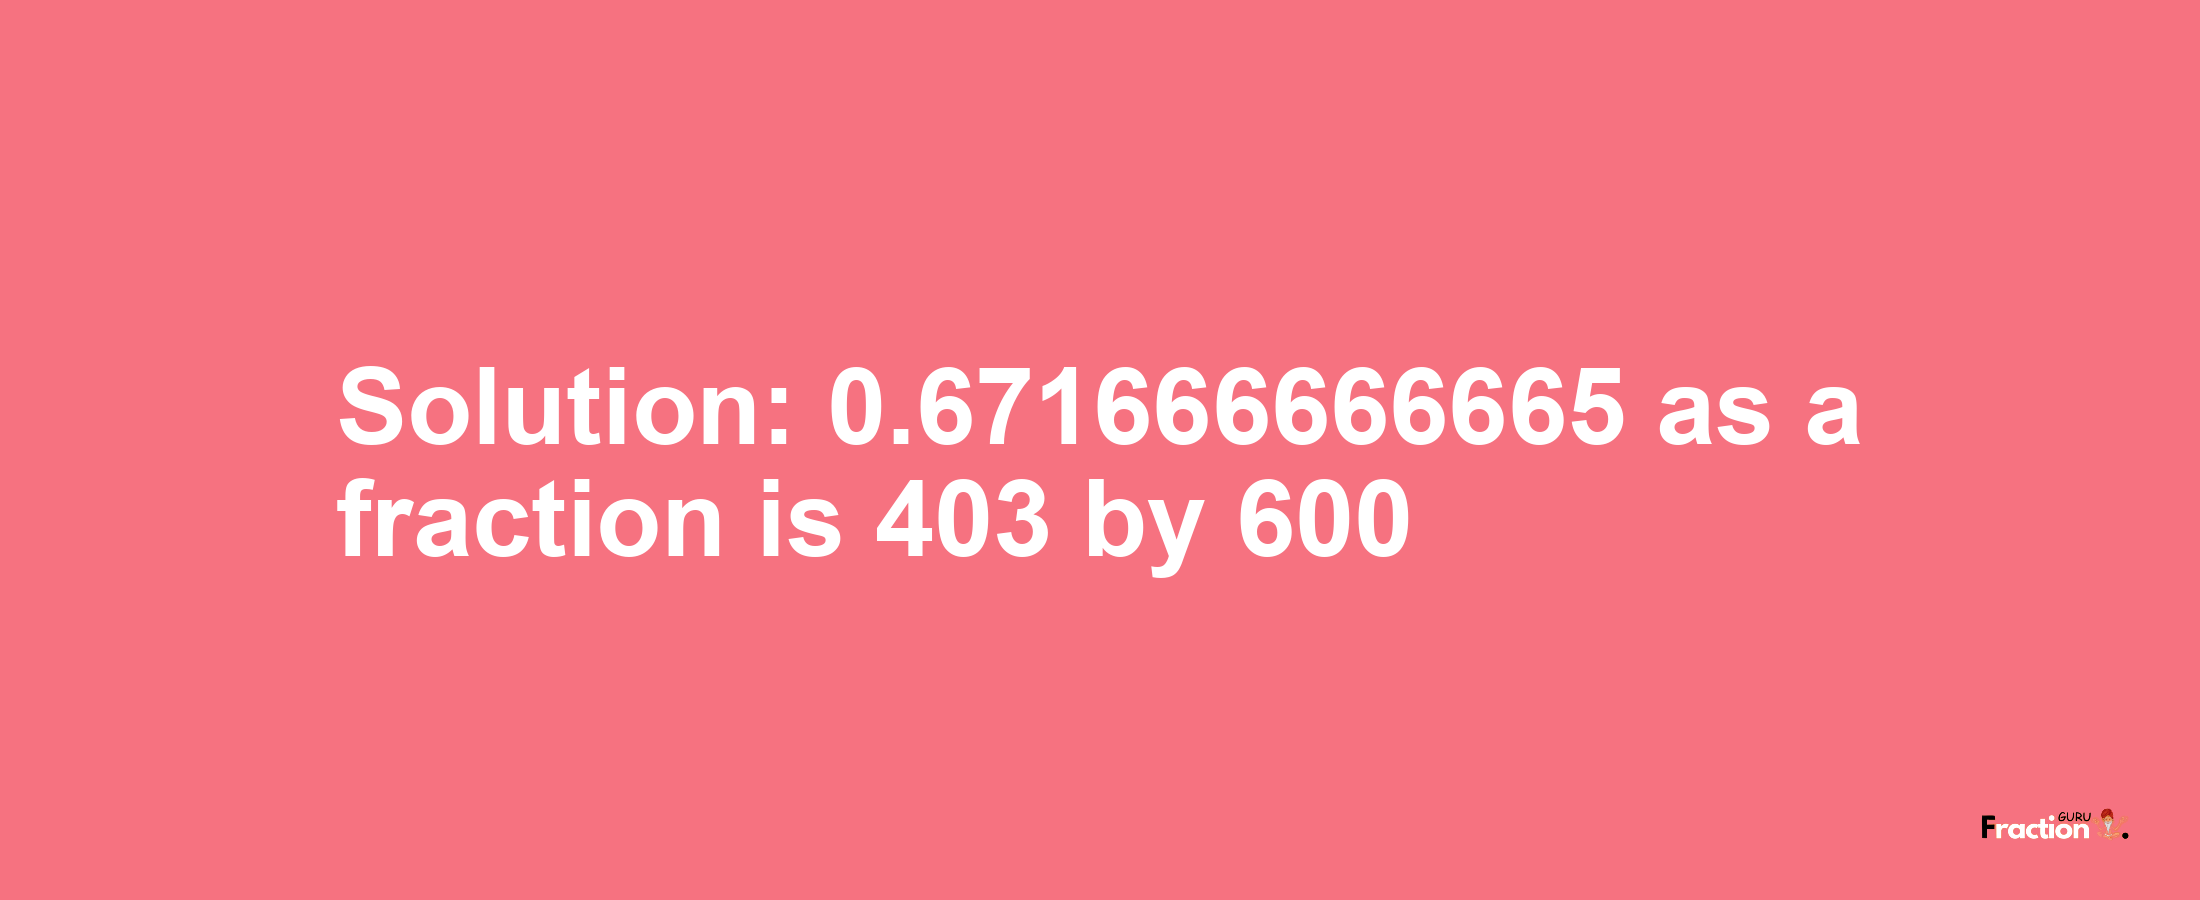 Solution:0.671666666665 as a fraction is 403/600